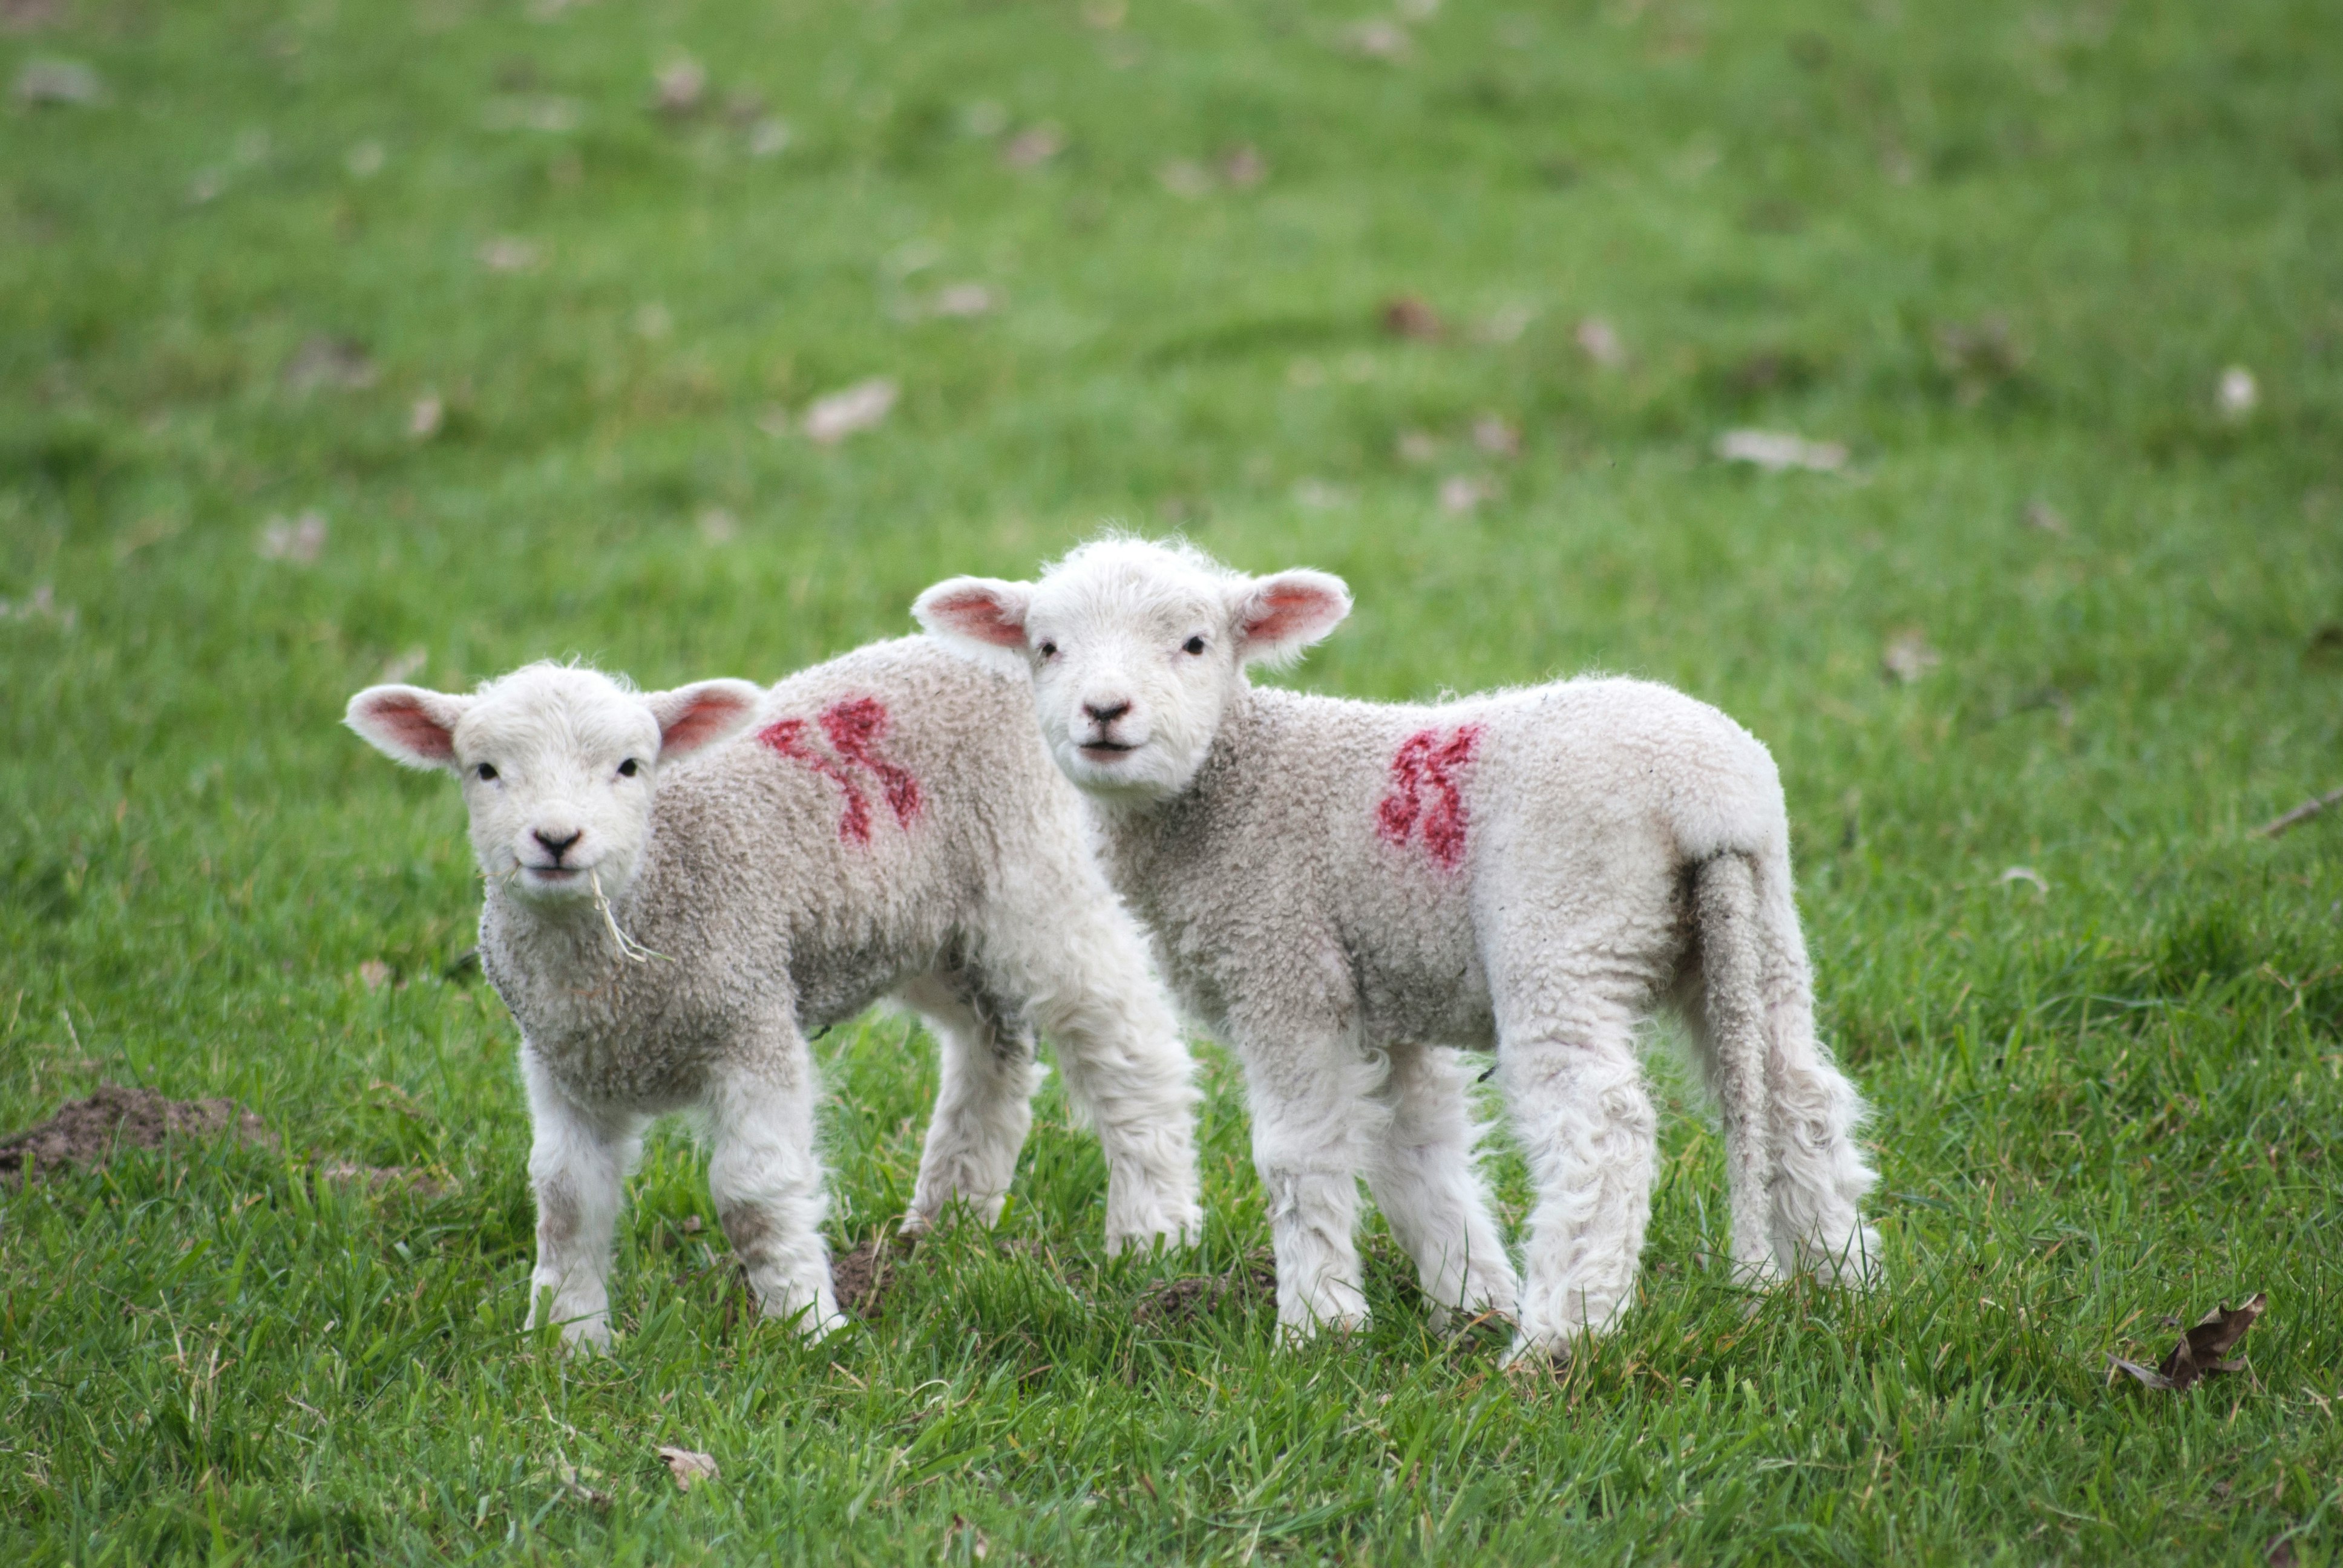 two white-and-red sheeps